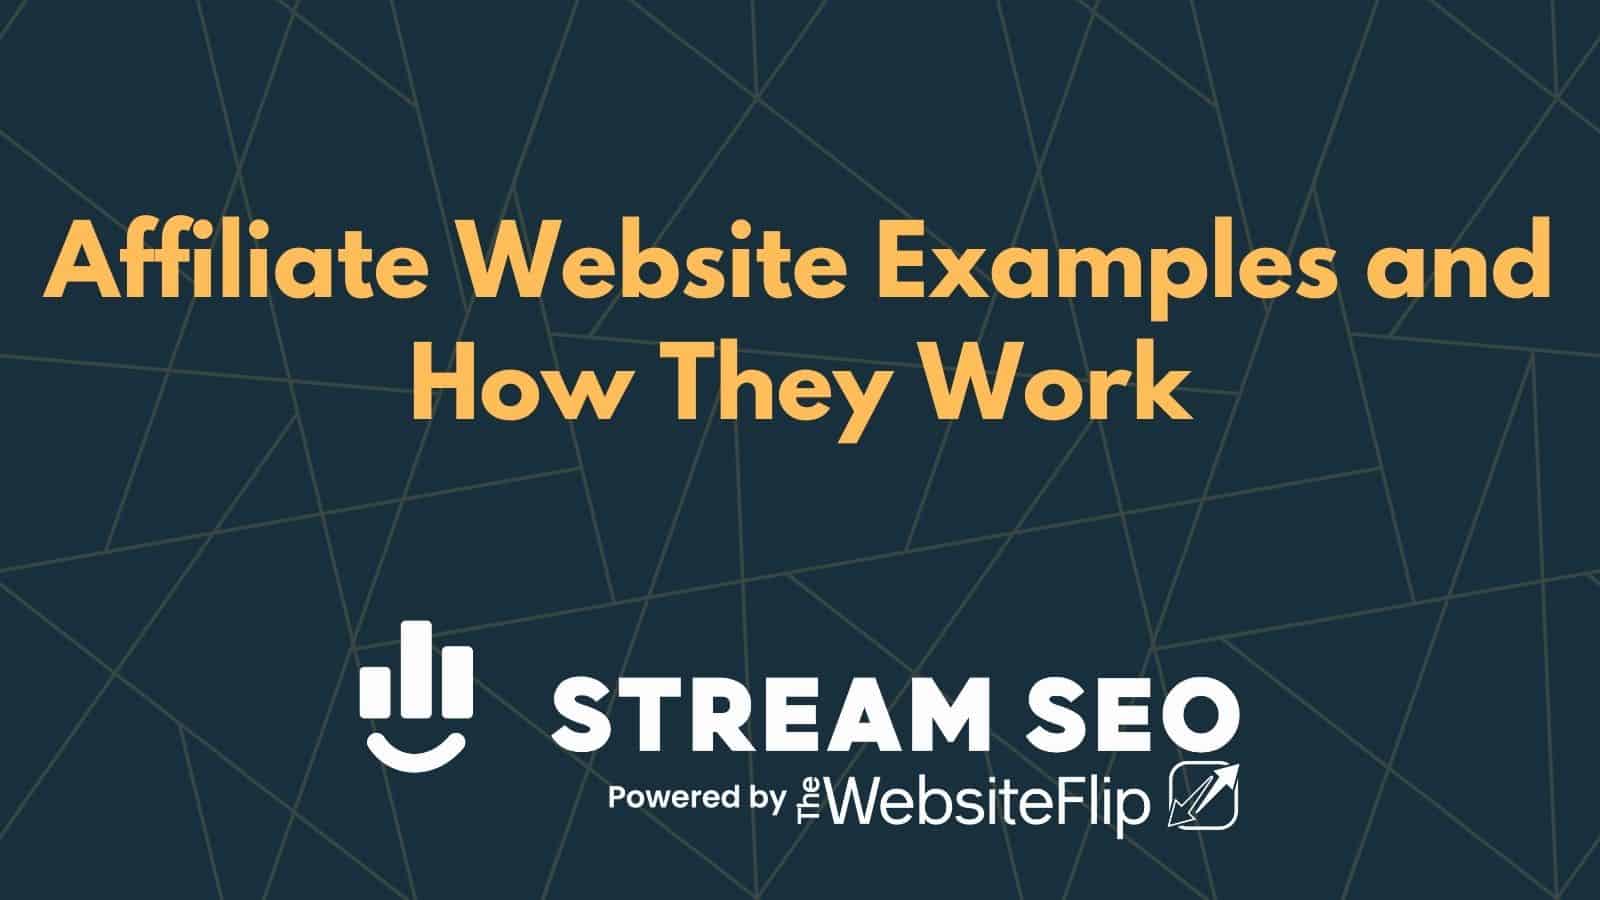 5 Affiliate Website Examples and How They Work